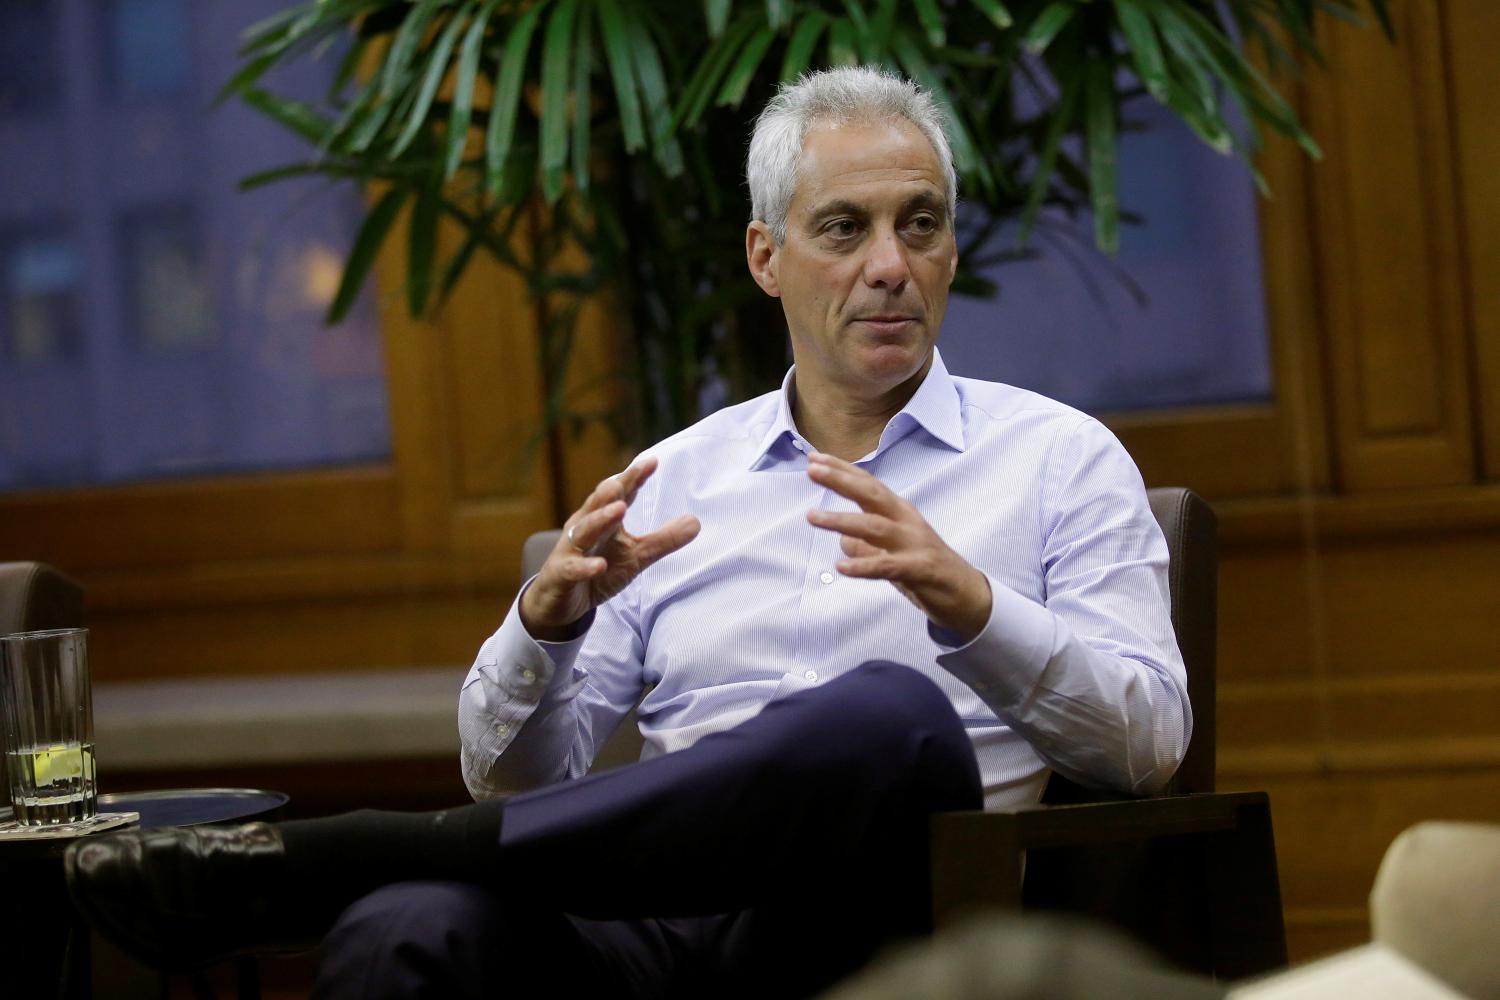 Chicago Mayor Rahm Emanuel speaks during an interview at City Hall in Chicago, Illinois, U.S. June 14, 2017. REUTERS/Joshua Lott - RC1DE62B05F0